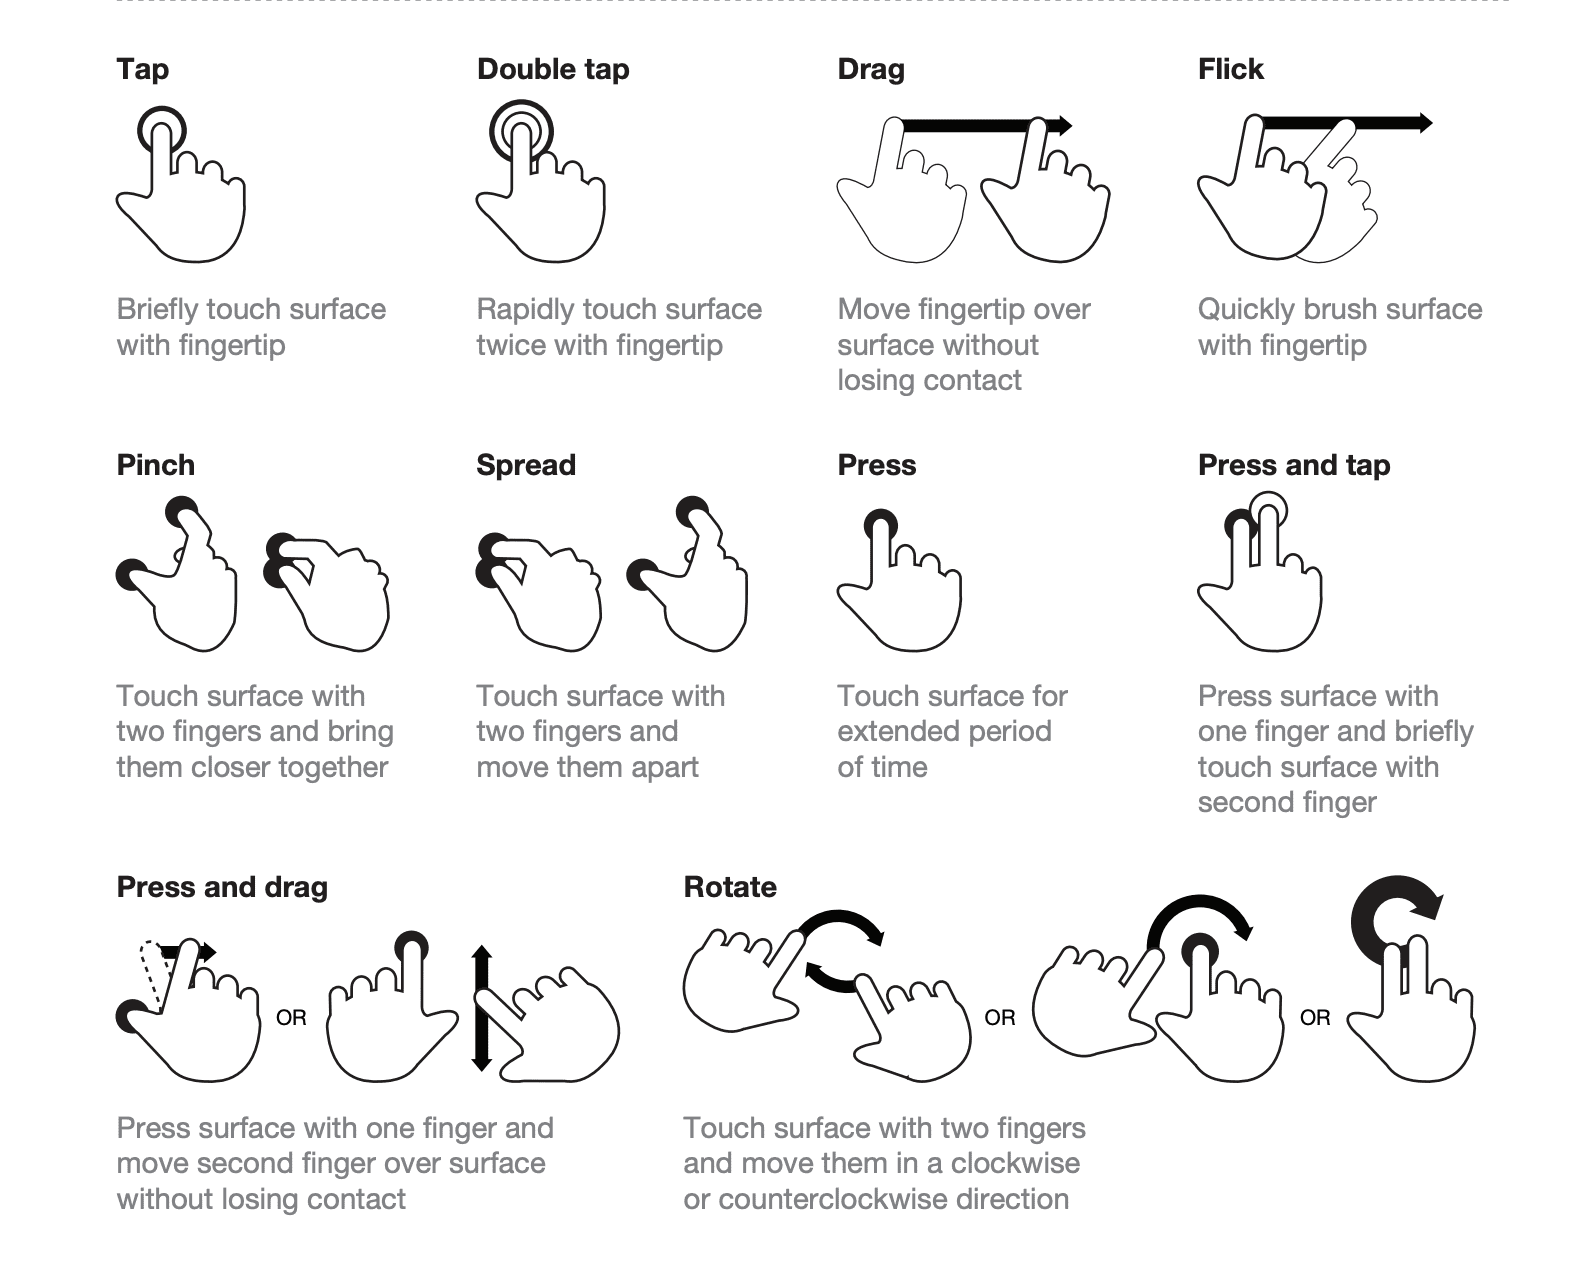 Basic gestures for apps